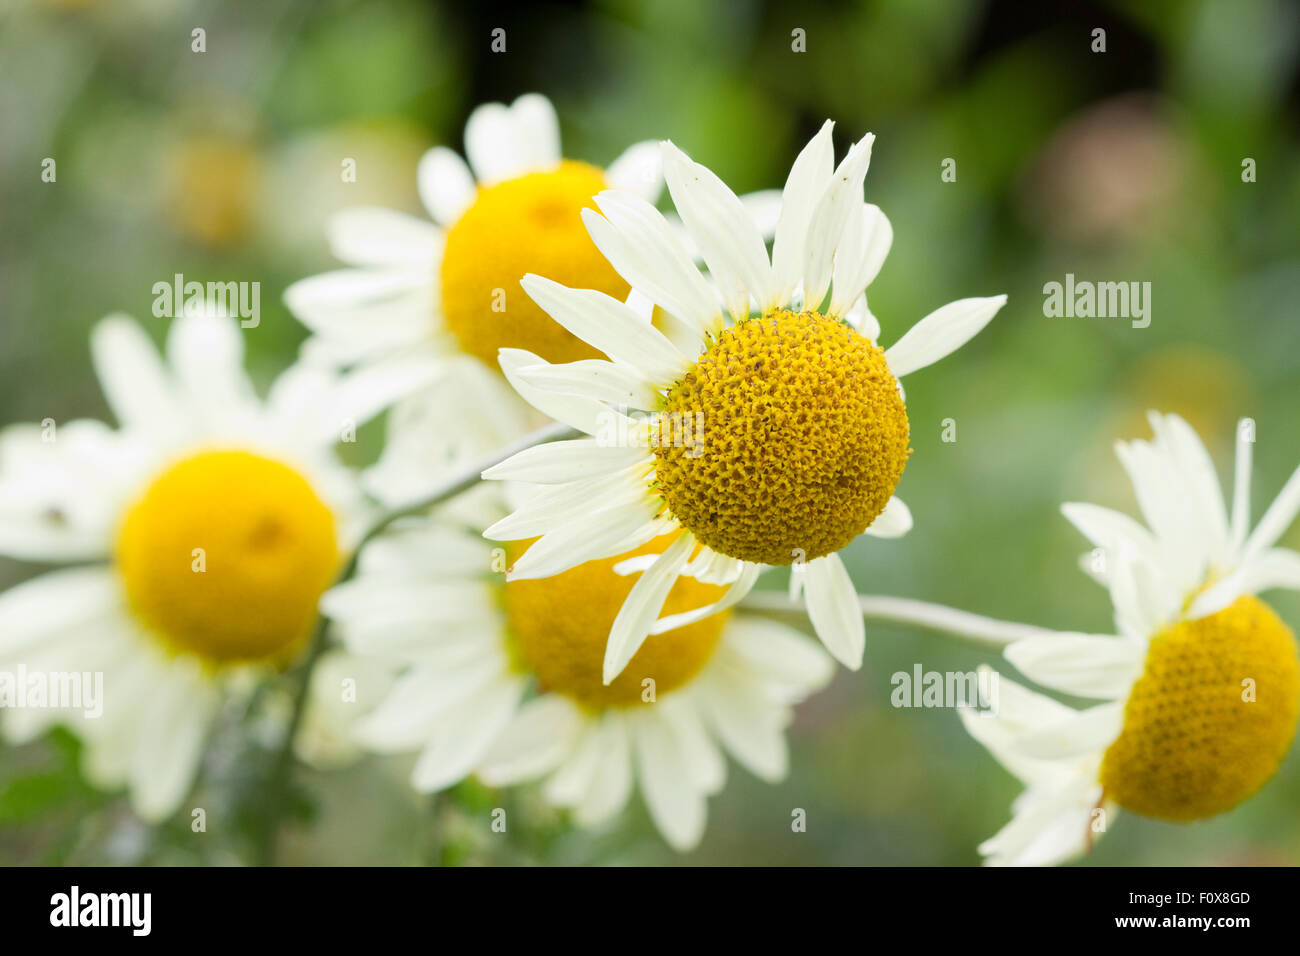 A group of wild daisies. Stock Photo